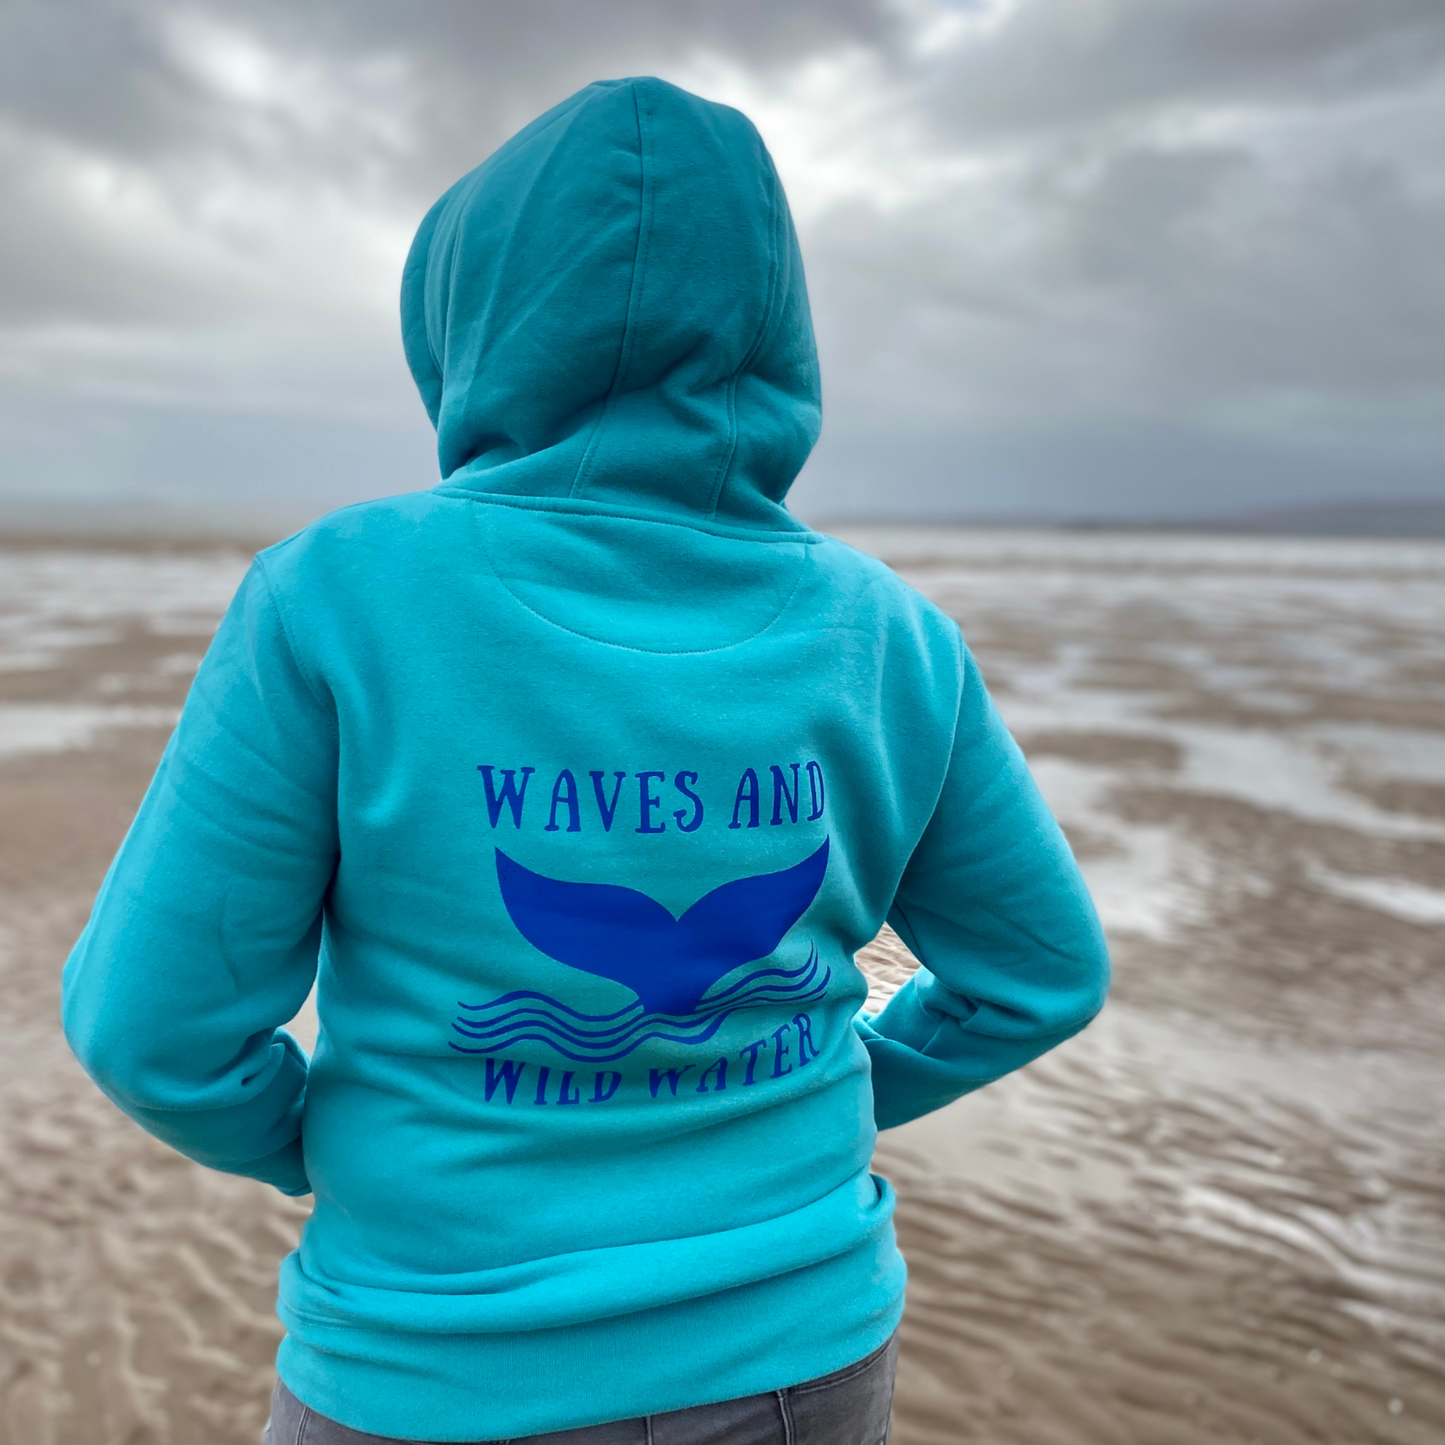 The back of a woman wearing a lagoon blue hoodie, with Waves & Wild Water logo printed on it in blue ink.